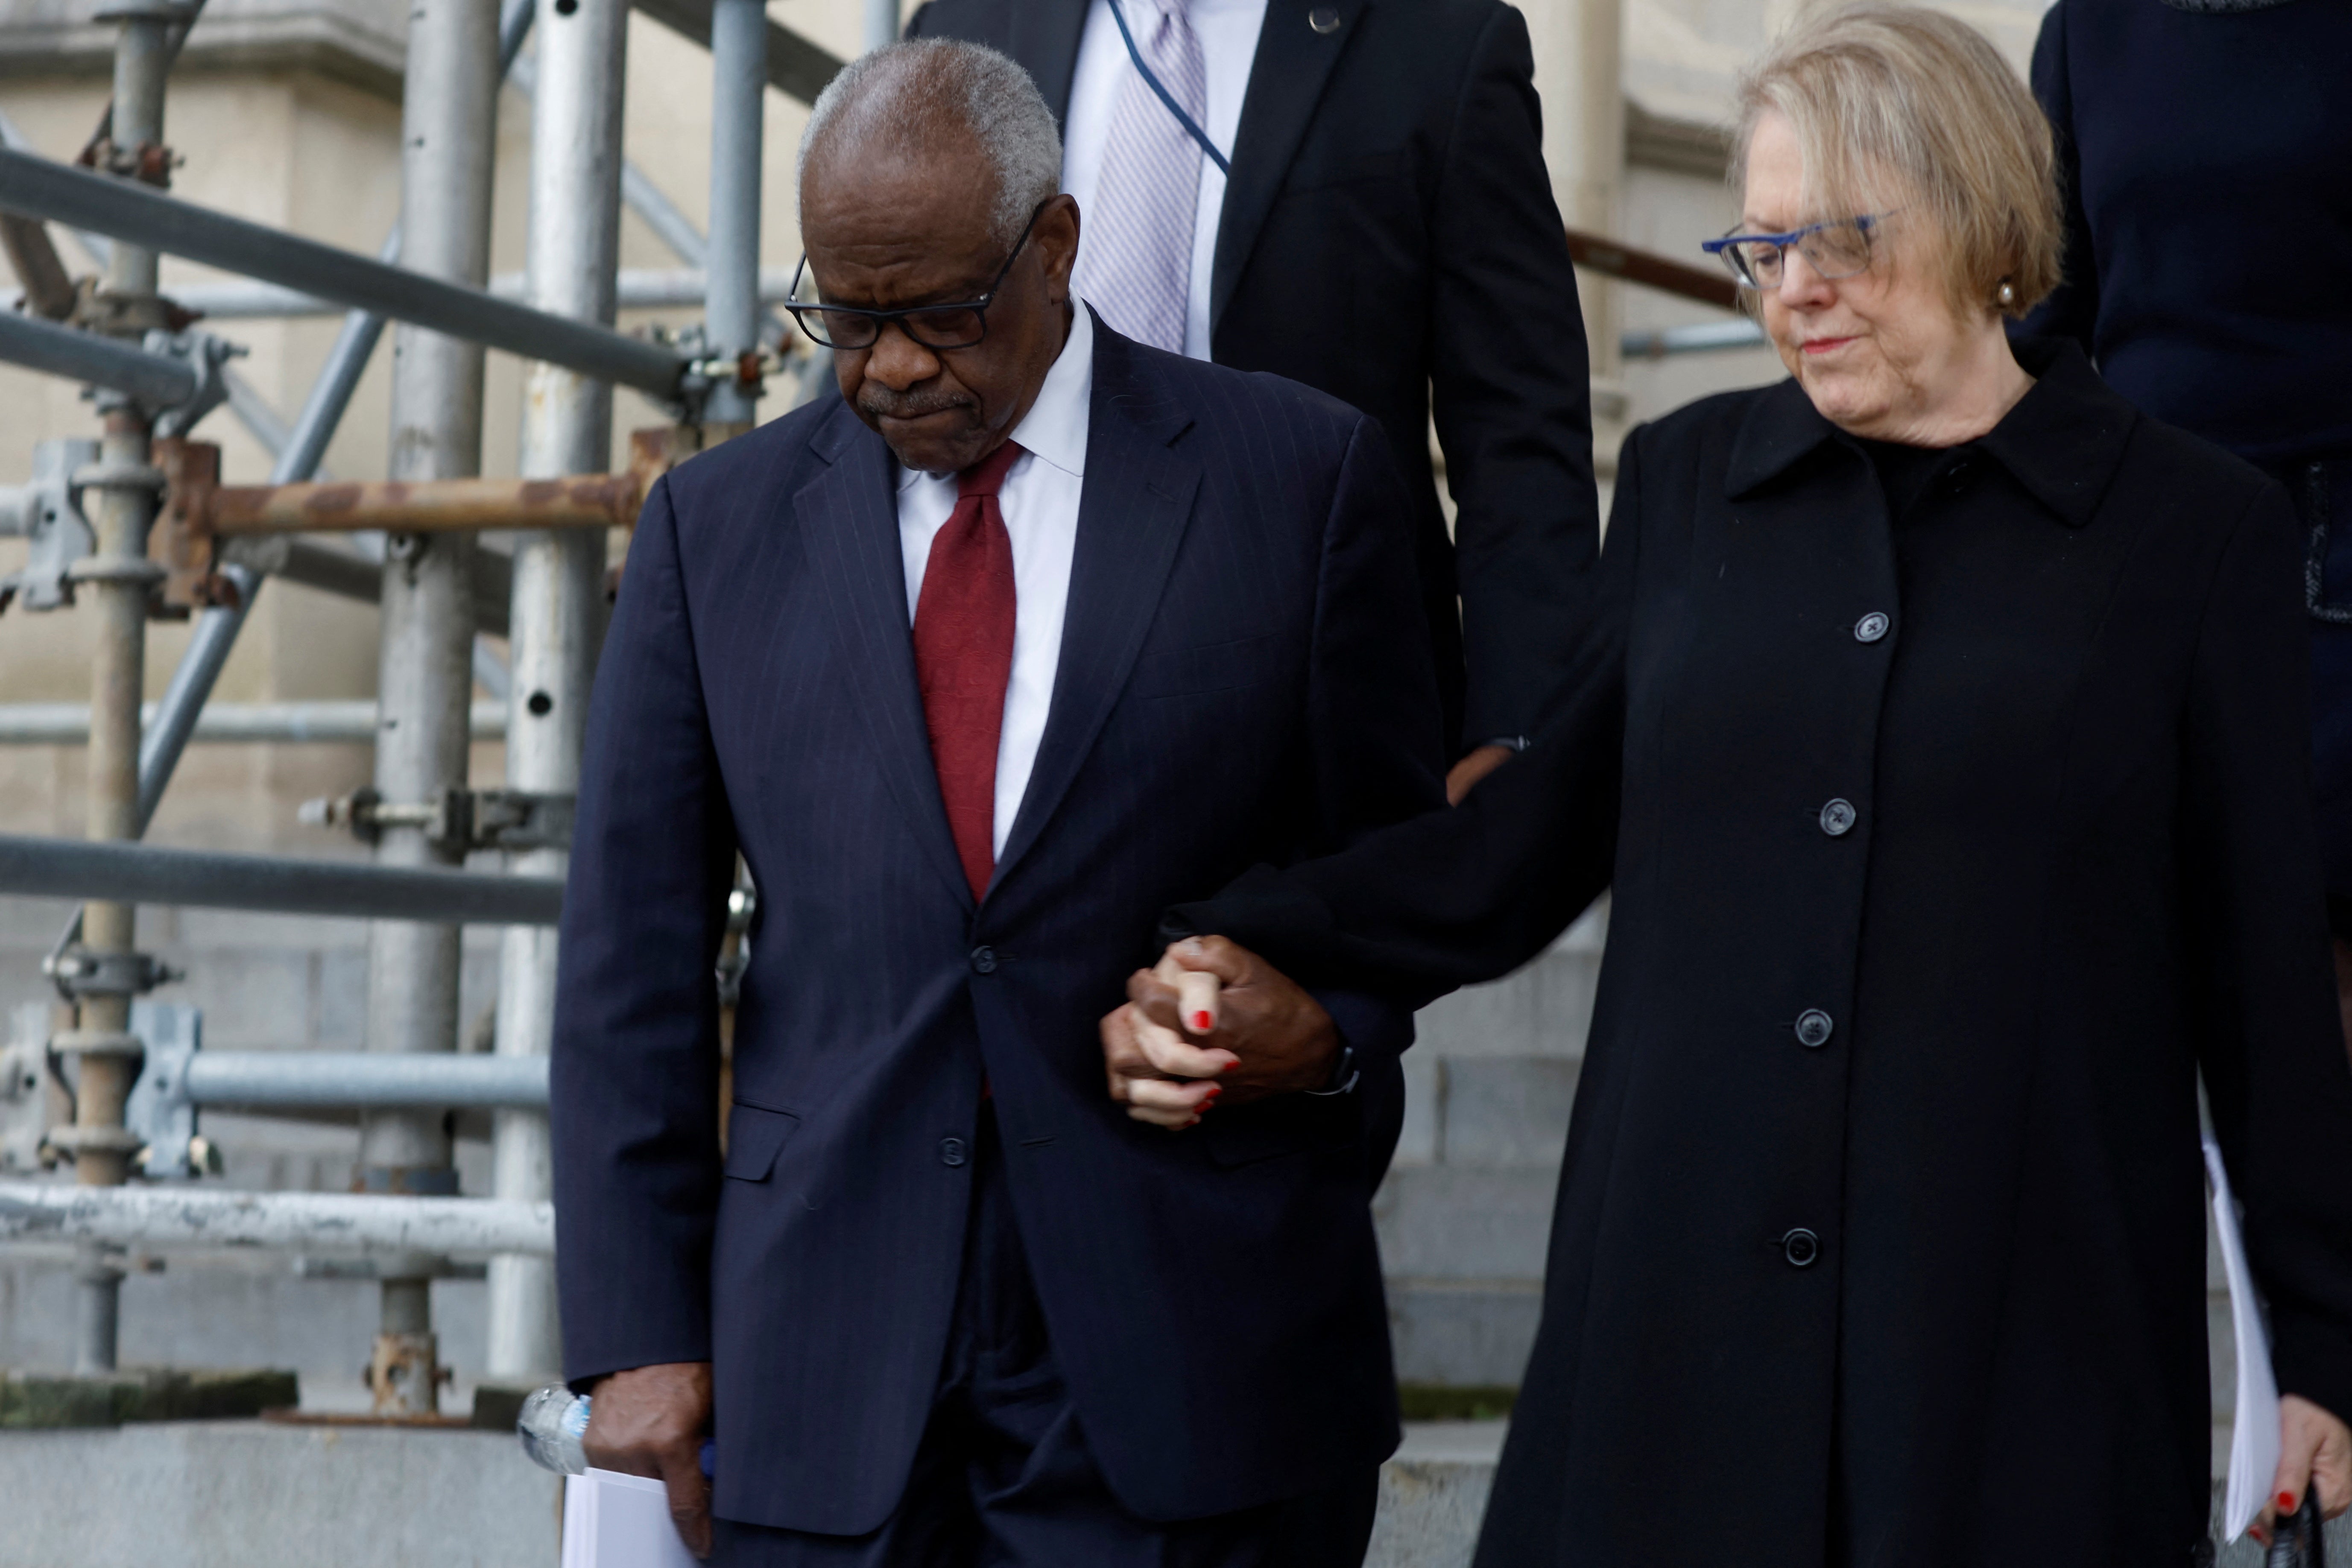 House Democrats have urged Supreme Court Justice Clarence Thomas, left, to recuse himself from a case involving Donald Trump’蝉 ballot eligiblity, citing his wife, Ginni Thomas, right, who promoted false election claims.